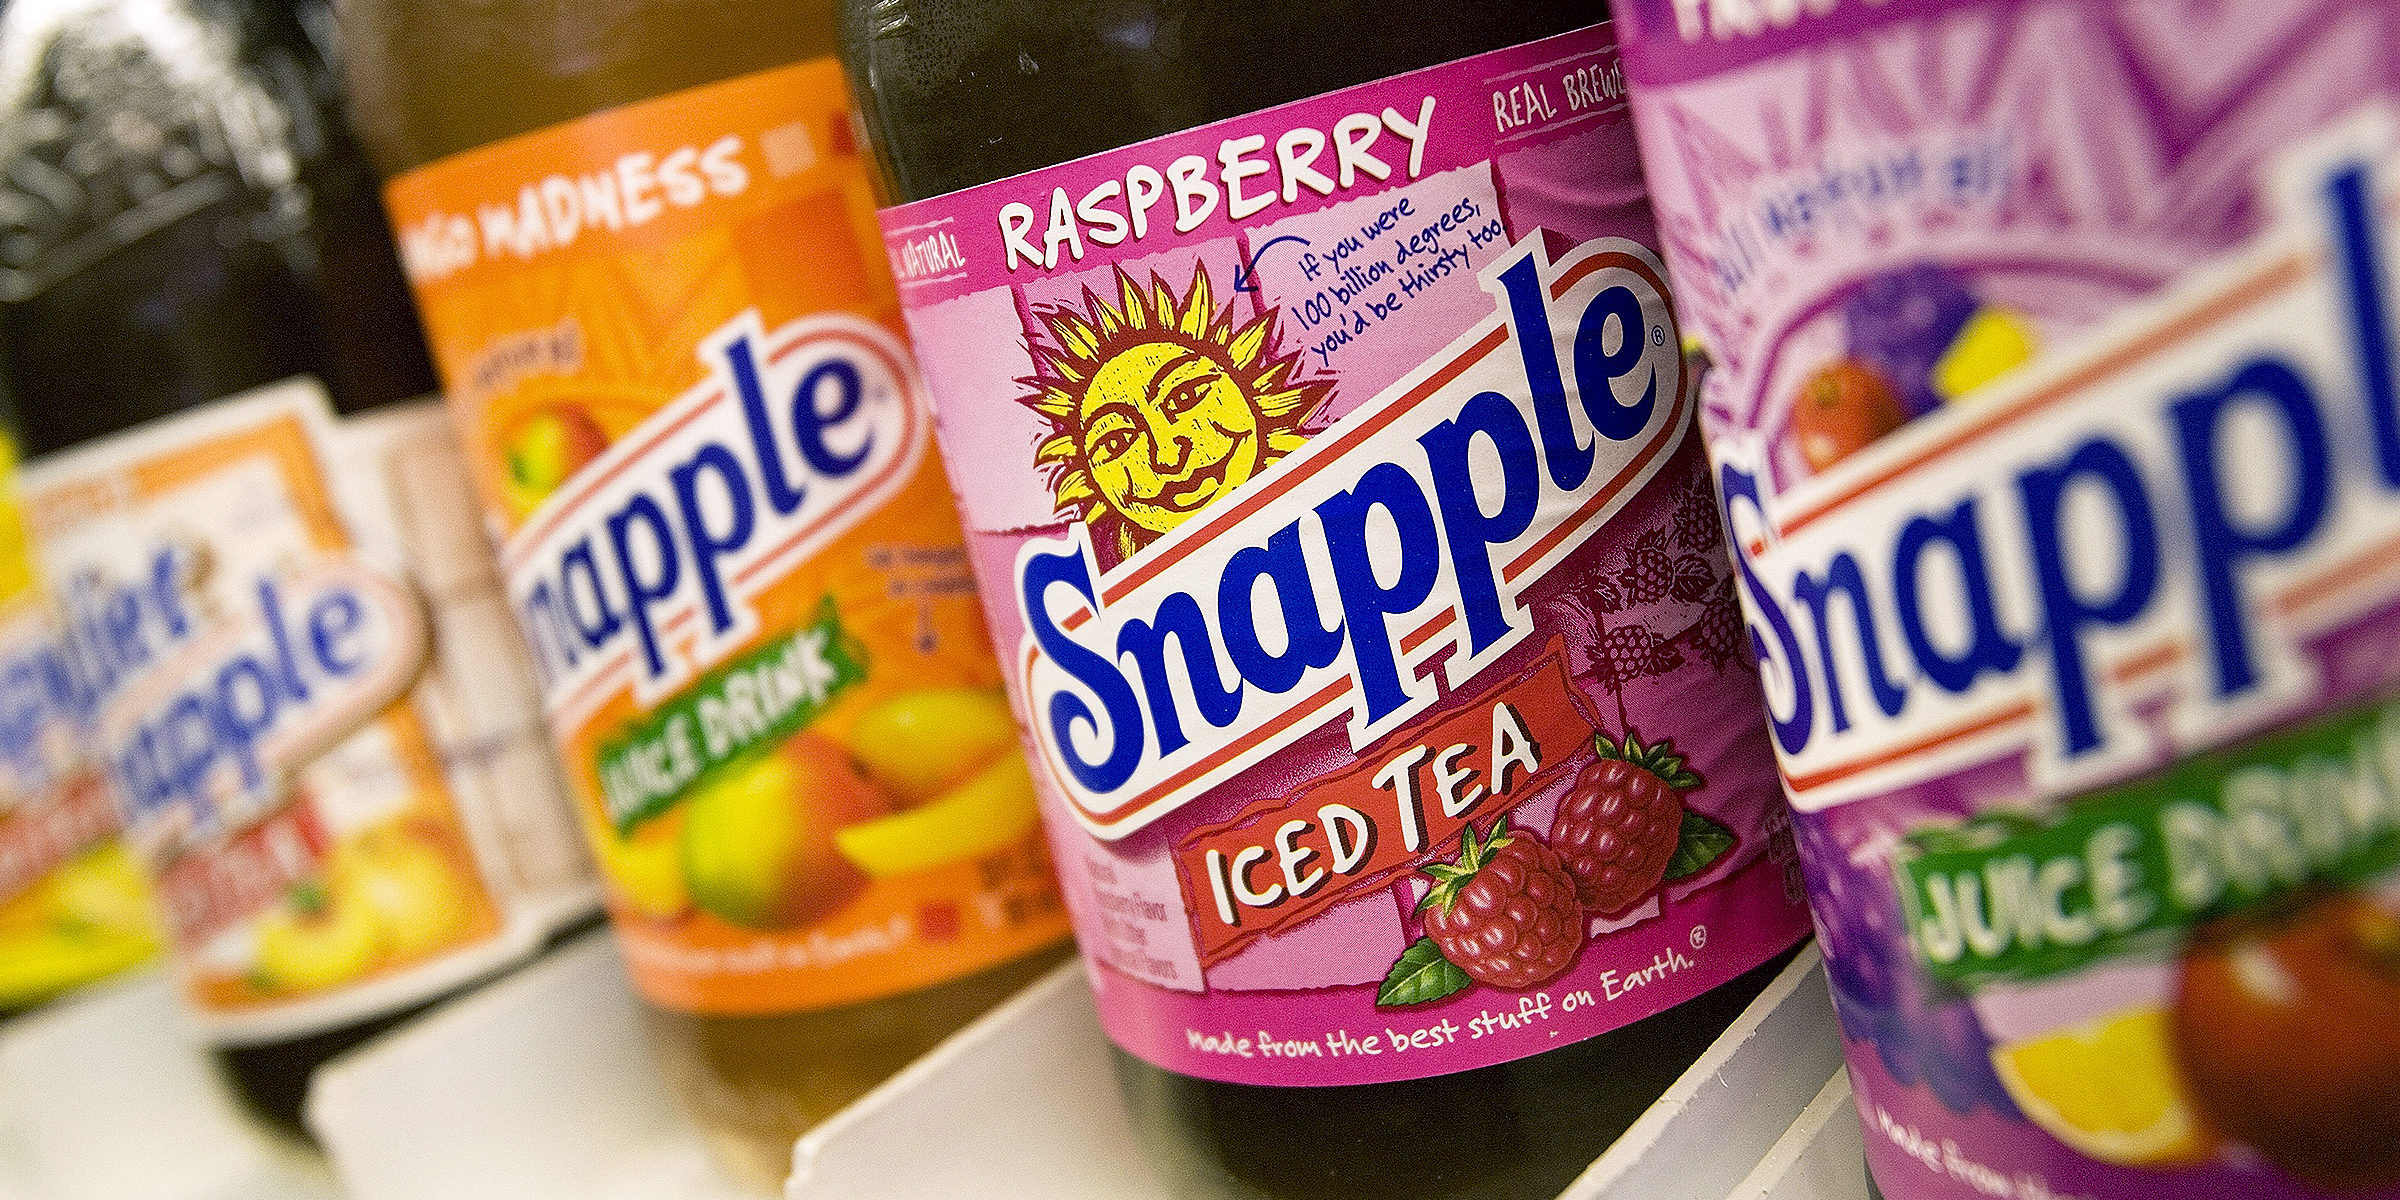 Assorted flavors of Snapple juice drinks | Source: Getty Images